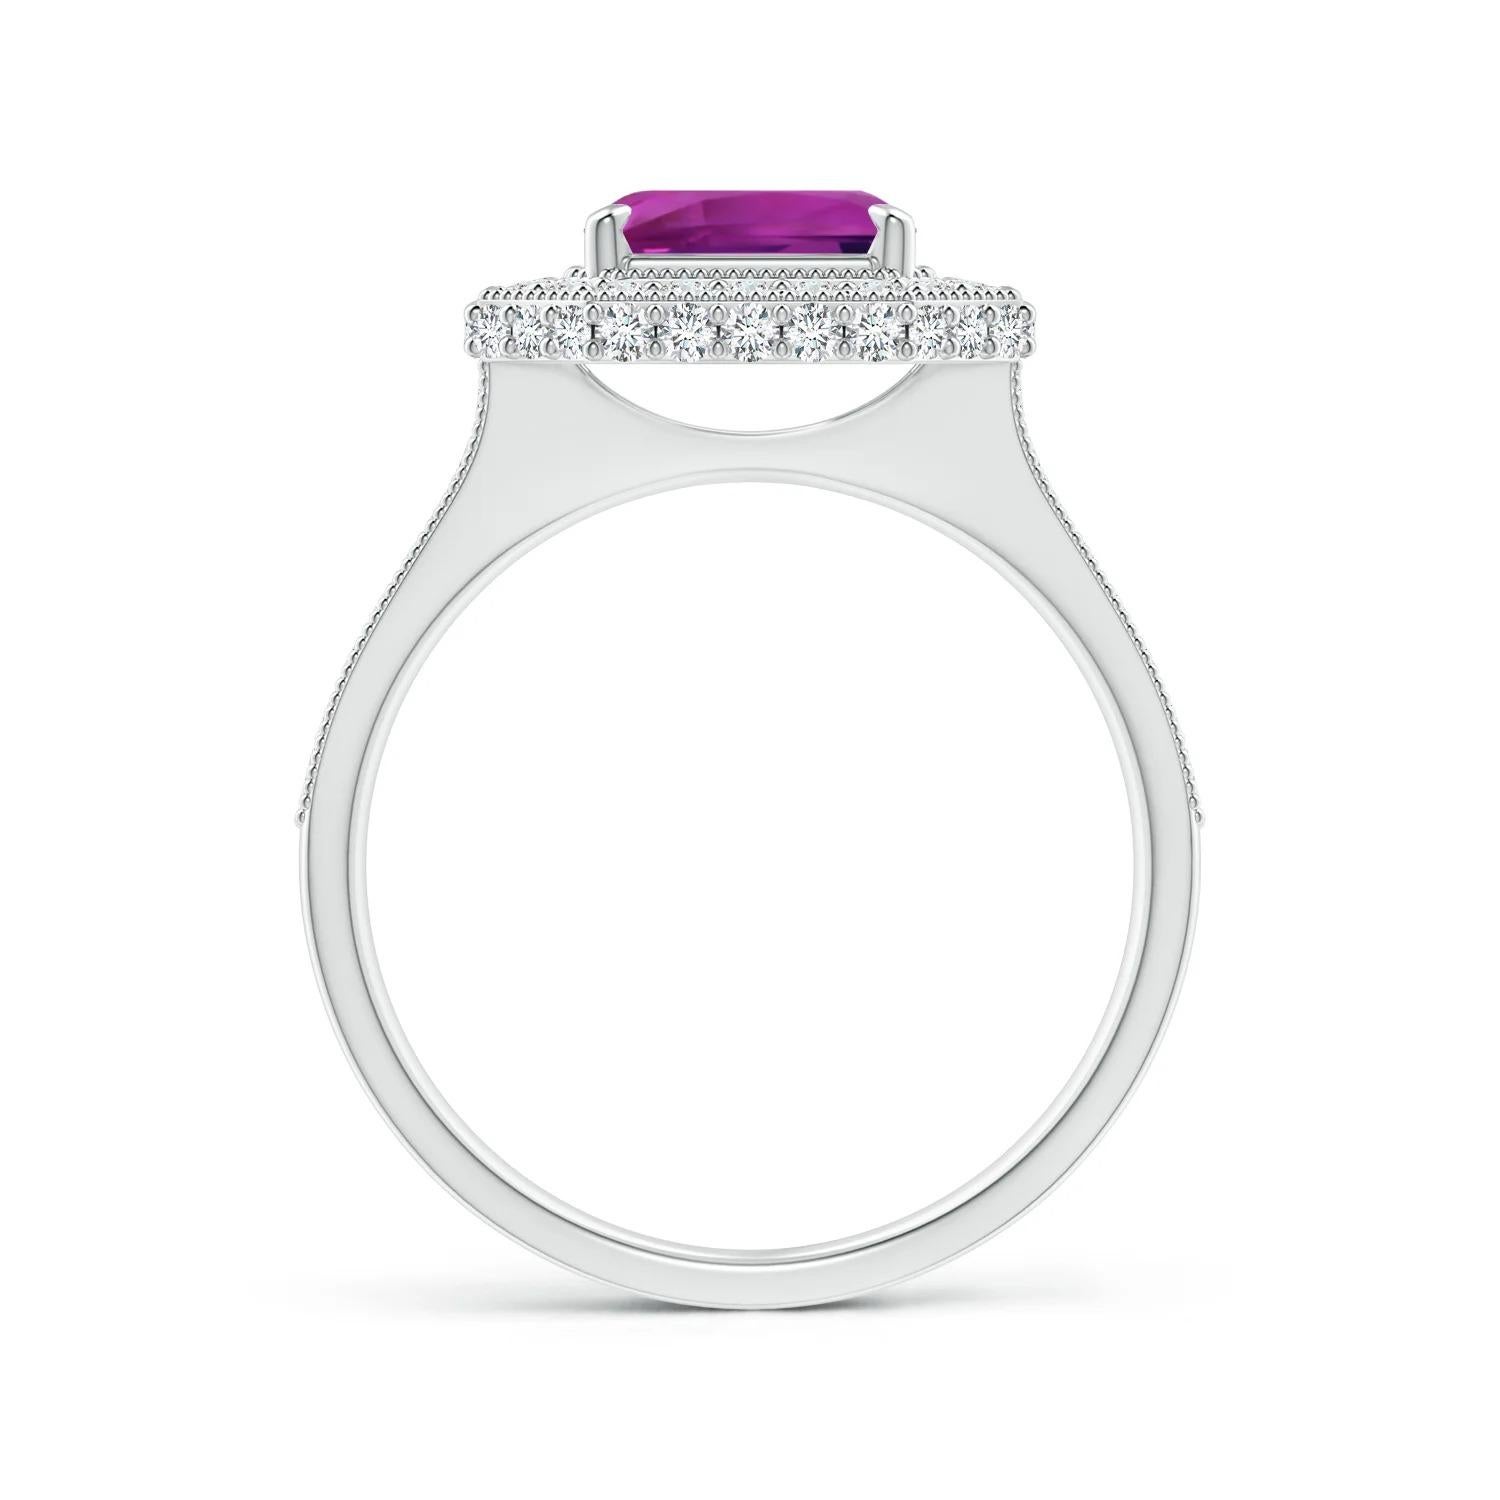 For Sale:  ANGARA GIA Certified Natural Emerald Cut Pink Sapphire Halo Ring in White Gold 2